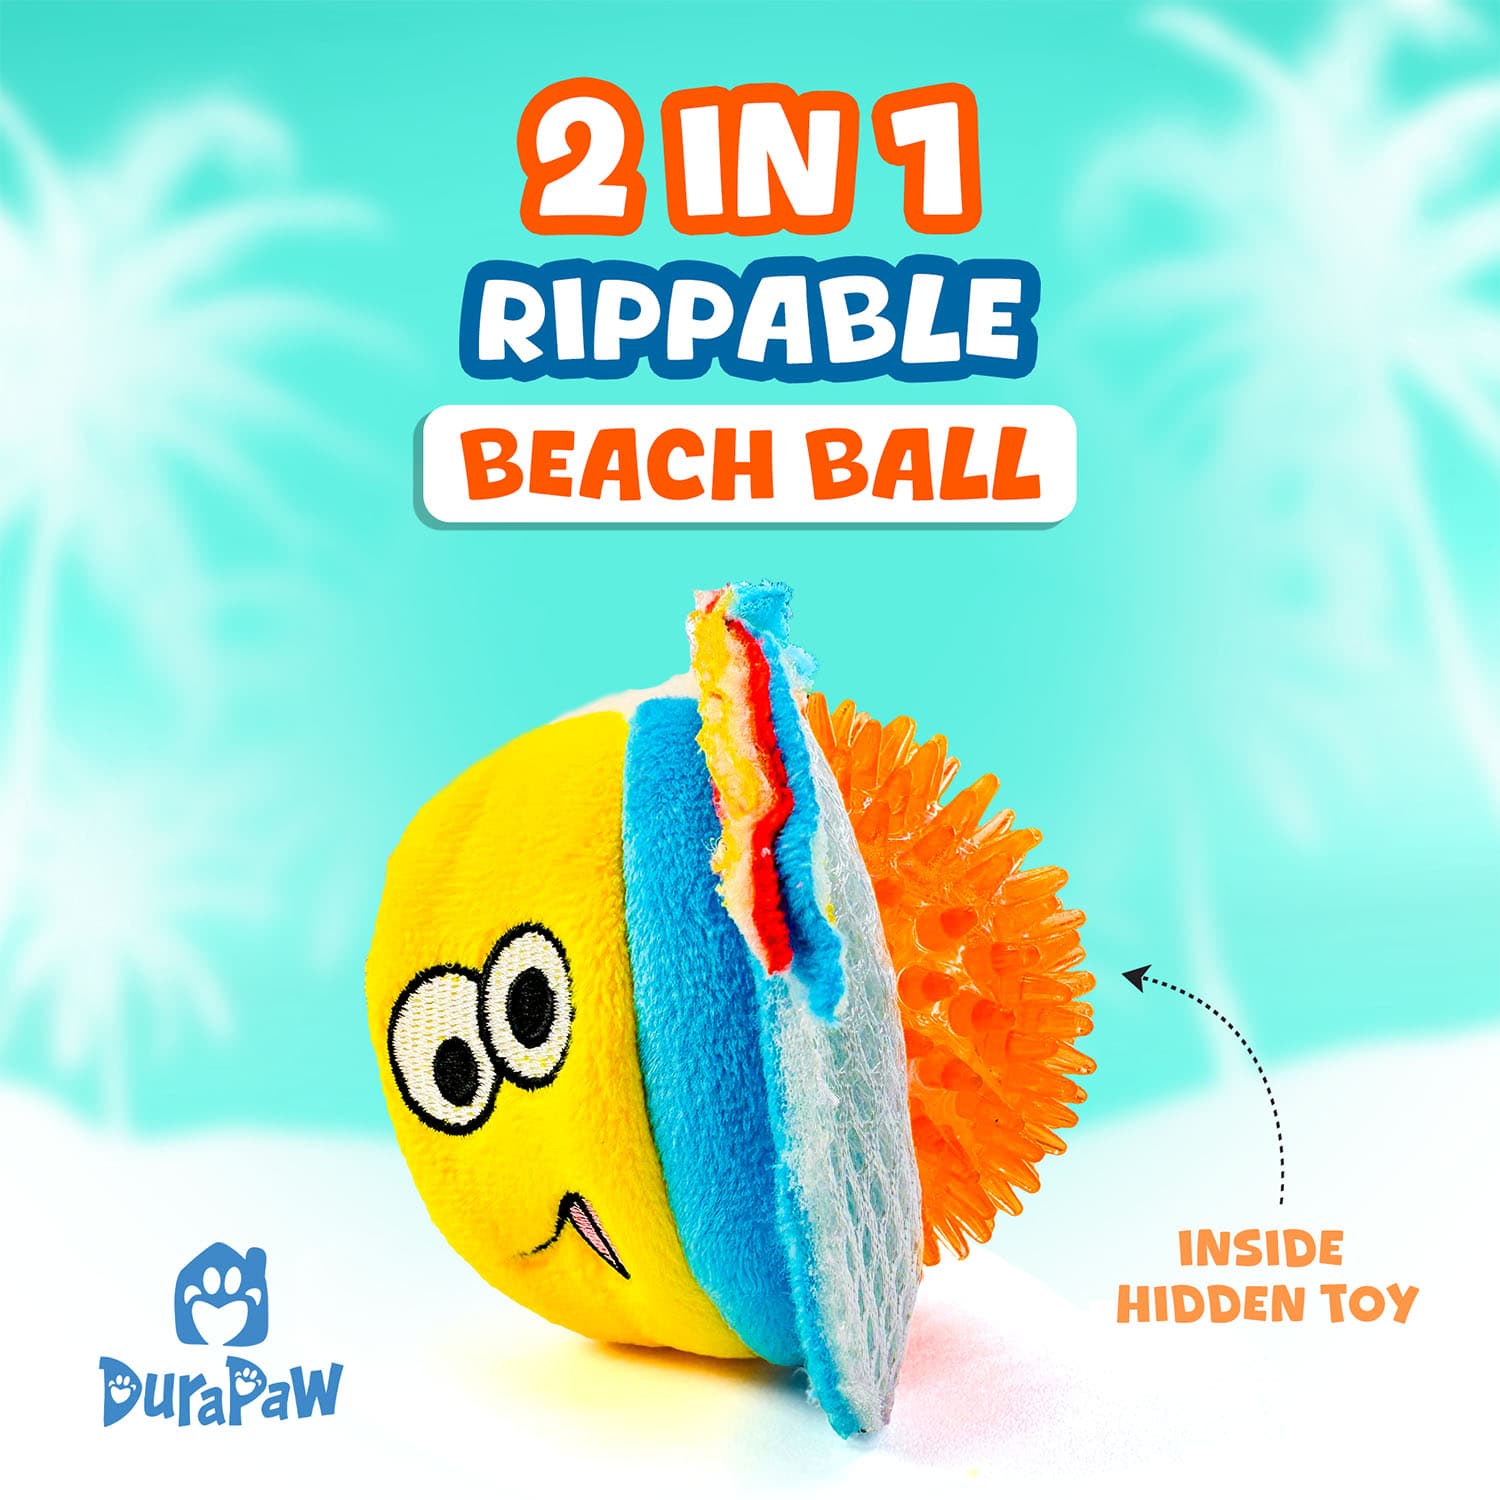 2 in 1 Rippable Beach Ball DuraPaw Pet Toy